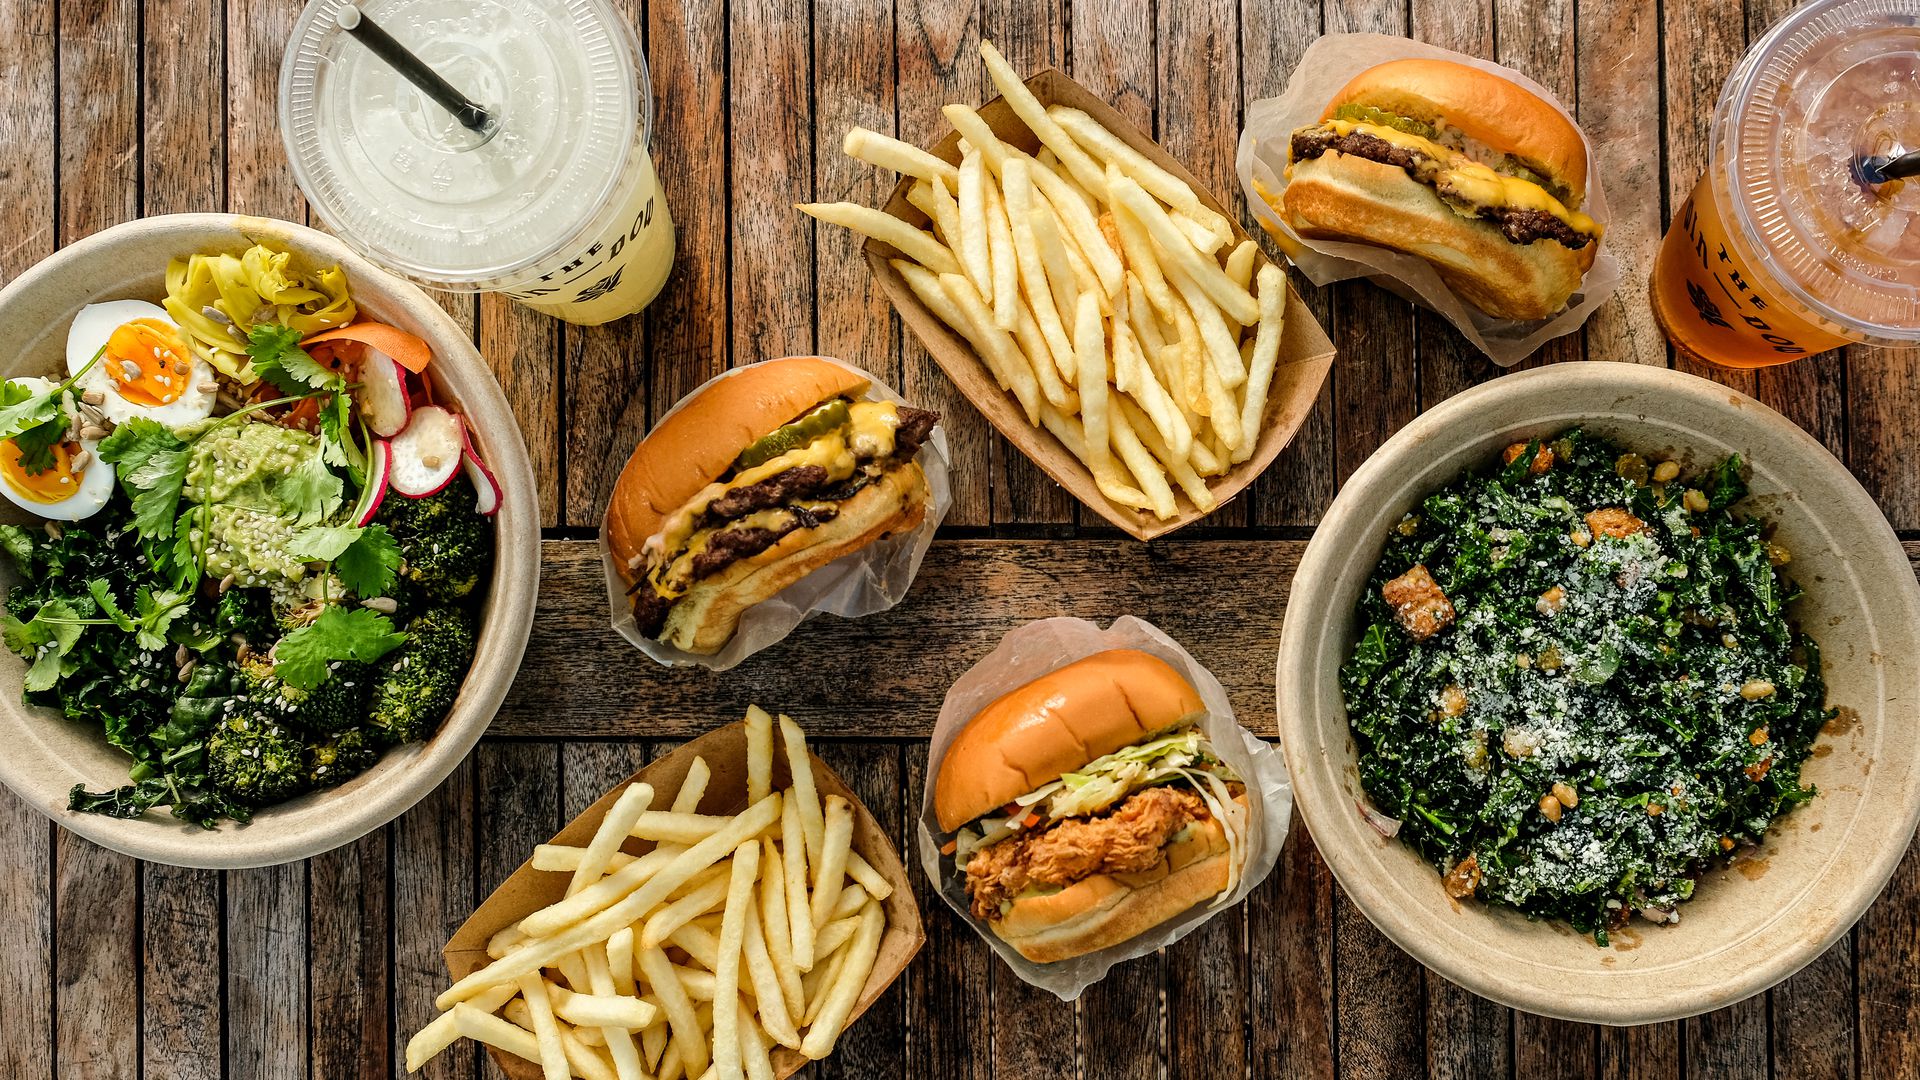 the window brings its superb $4 smash burgers to hollywood this summer